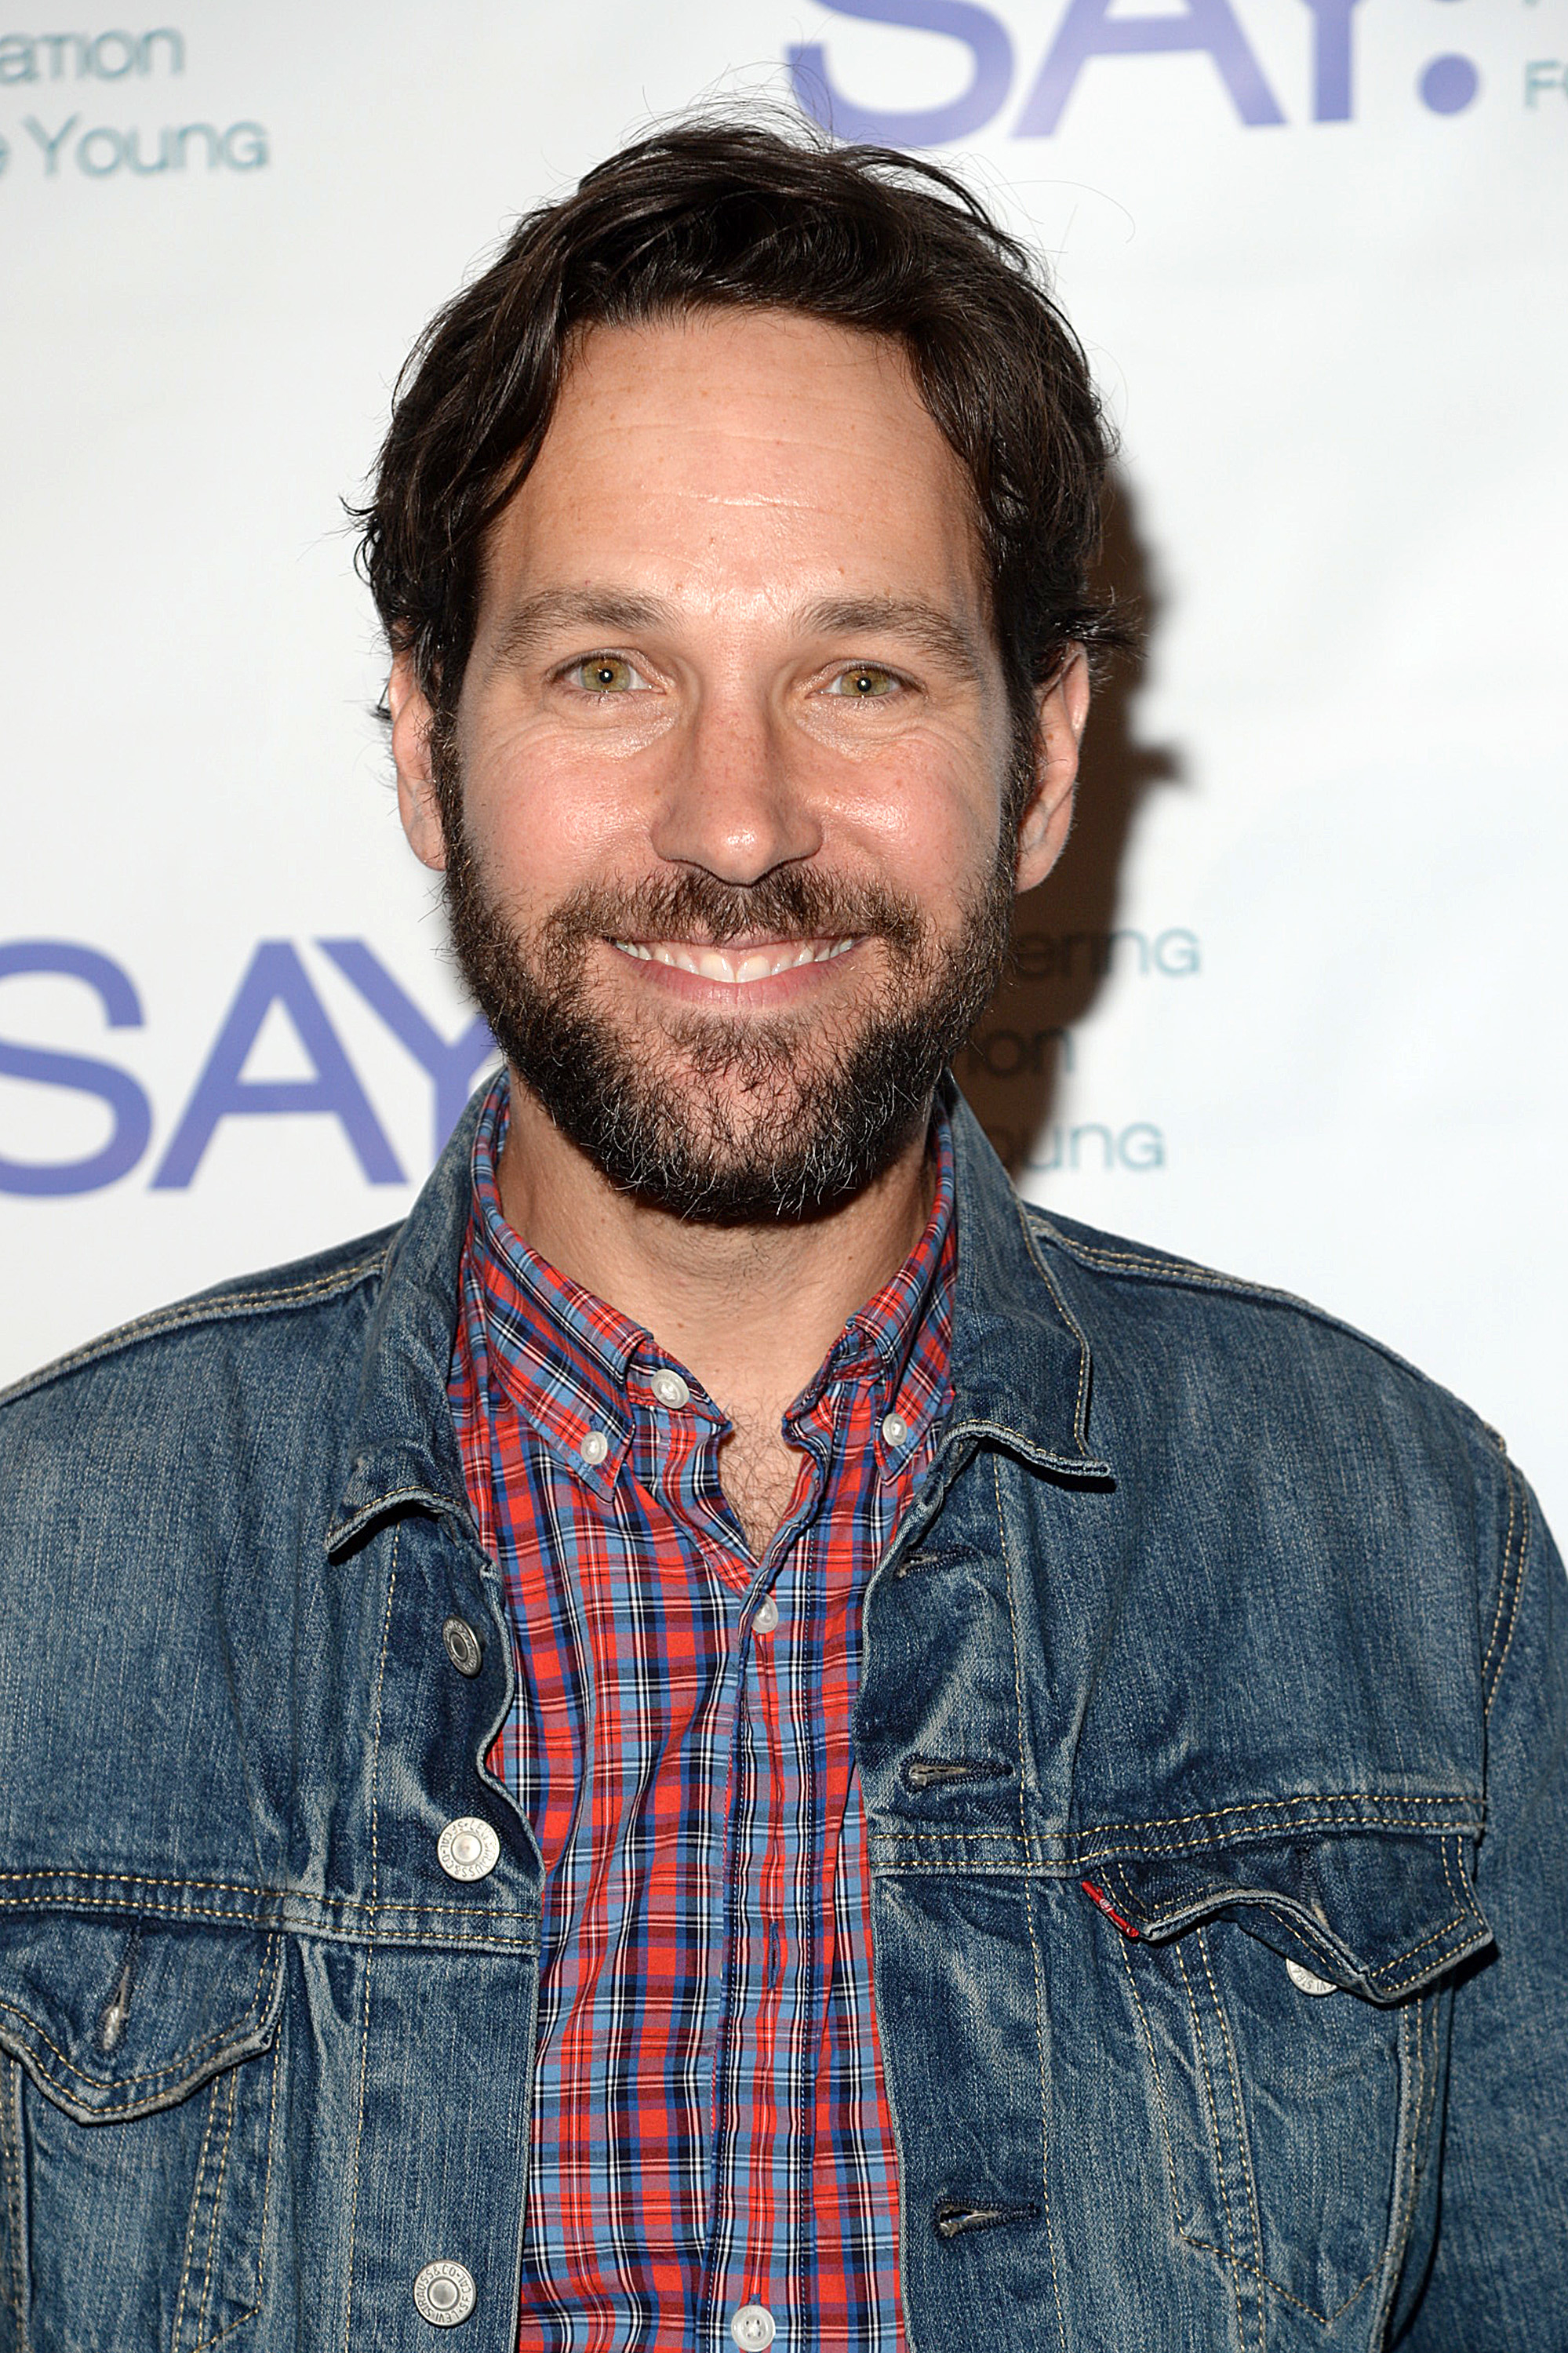 Paul smiling in a denim jacket over a plaid shirt at an event